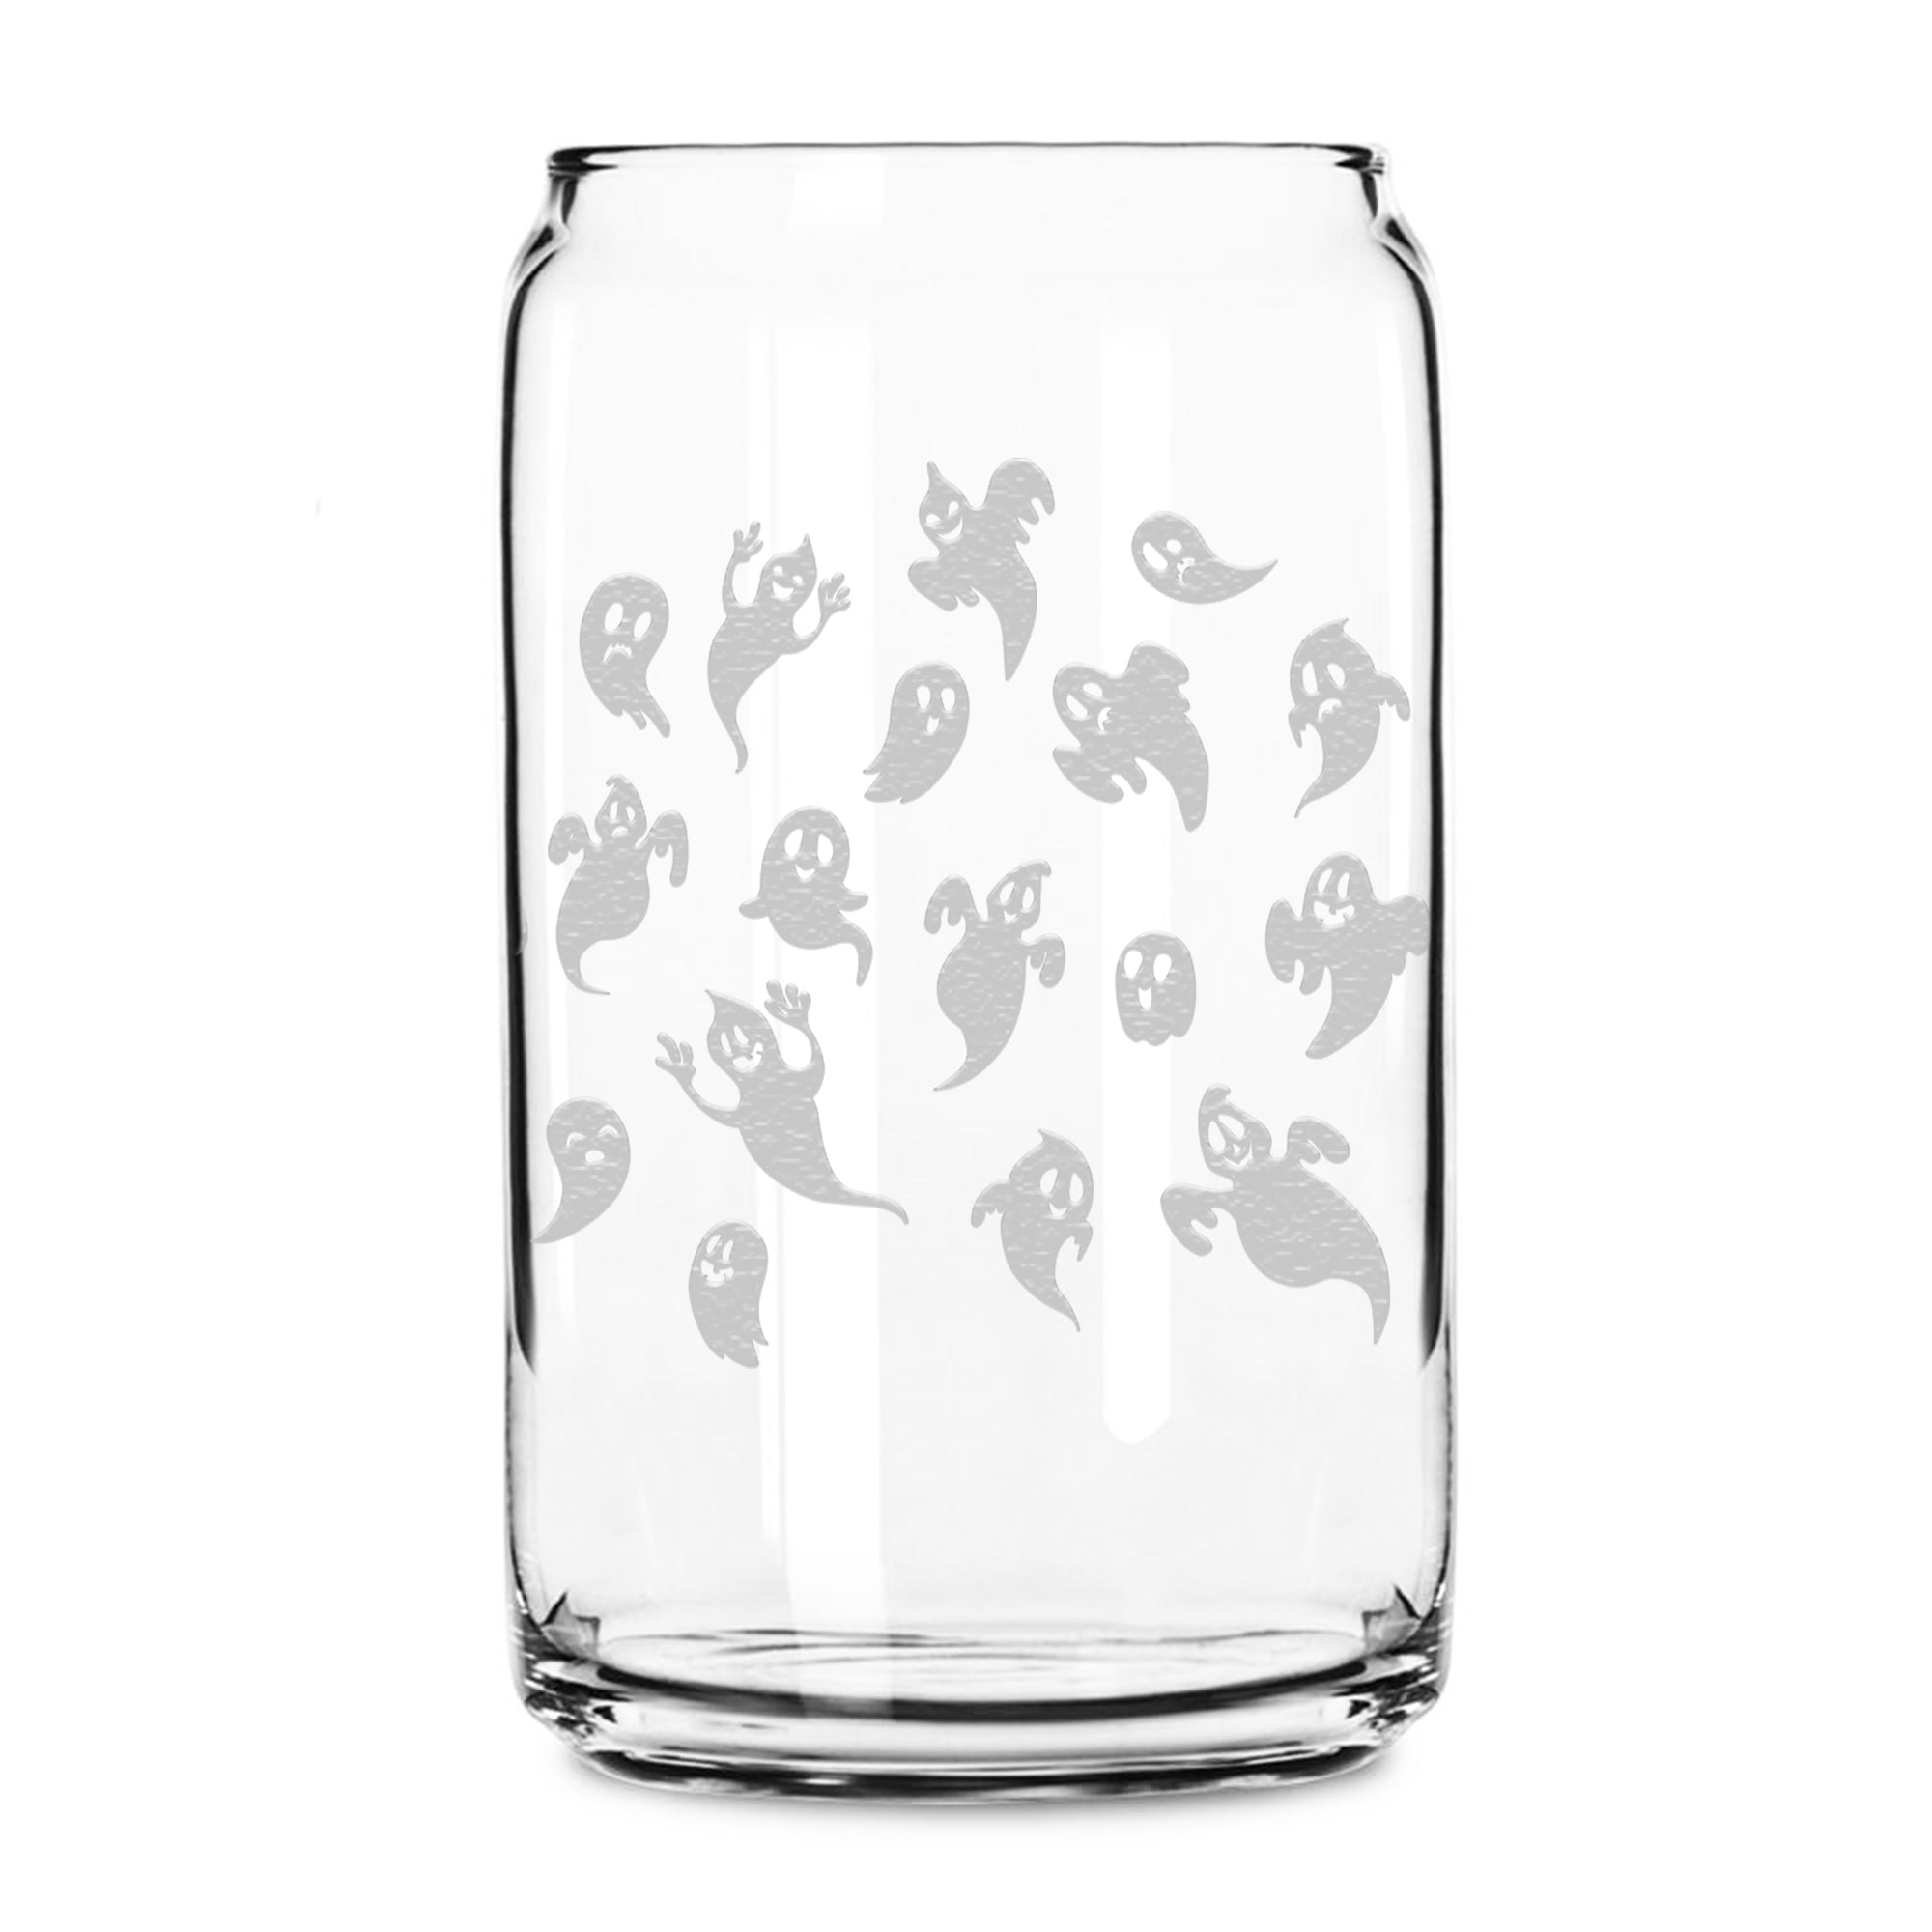 Integrity Bottles, Full 360°, Laser Etched, Halloween Ghost Wrap, Premium Beer Glass, Handmade, 16oz, Laser Etched or Hand Etched